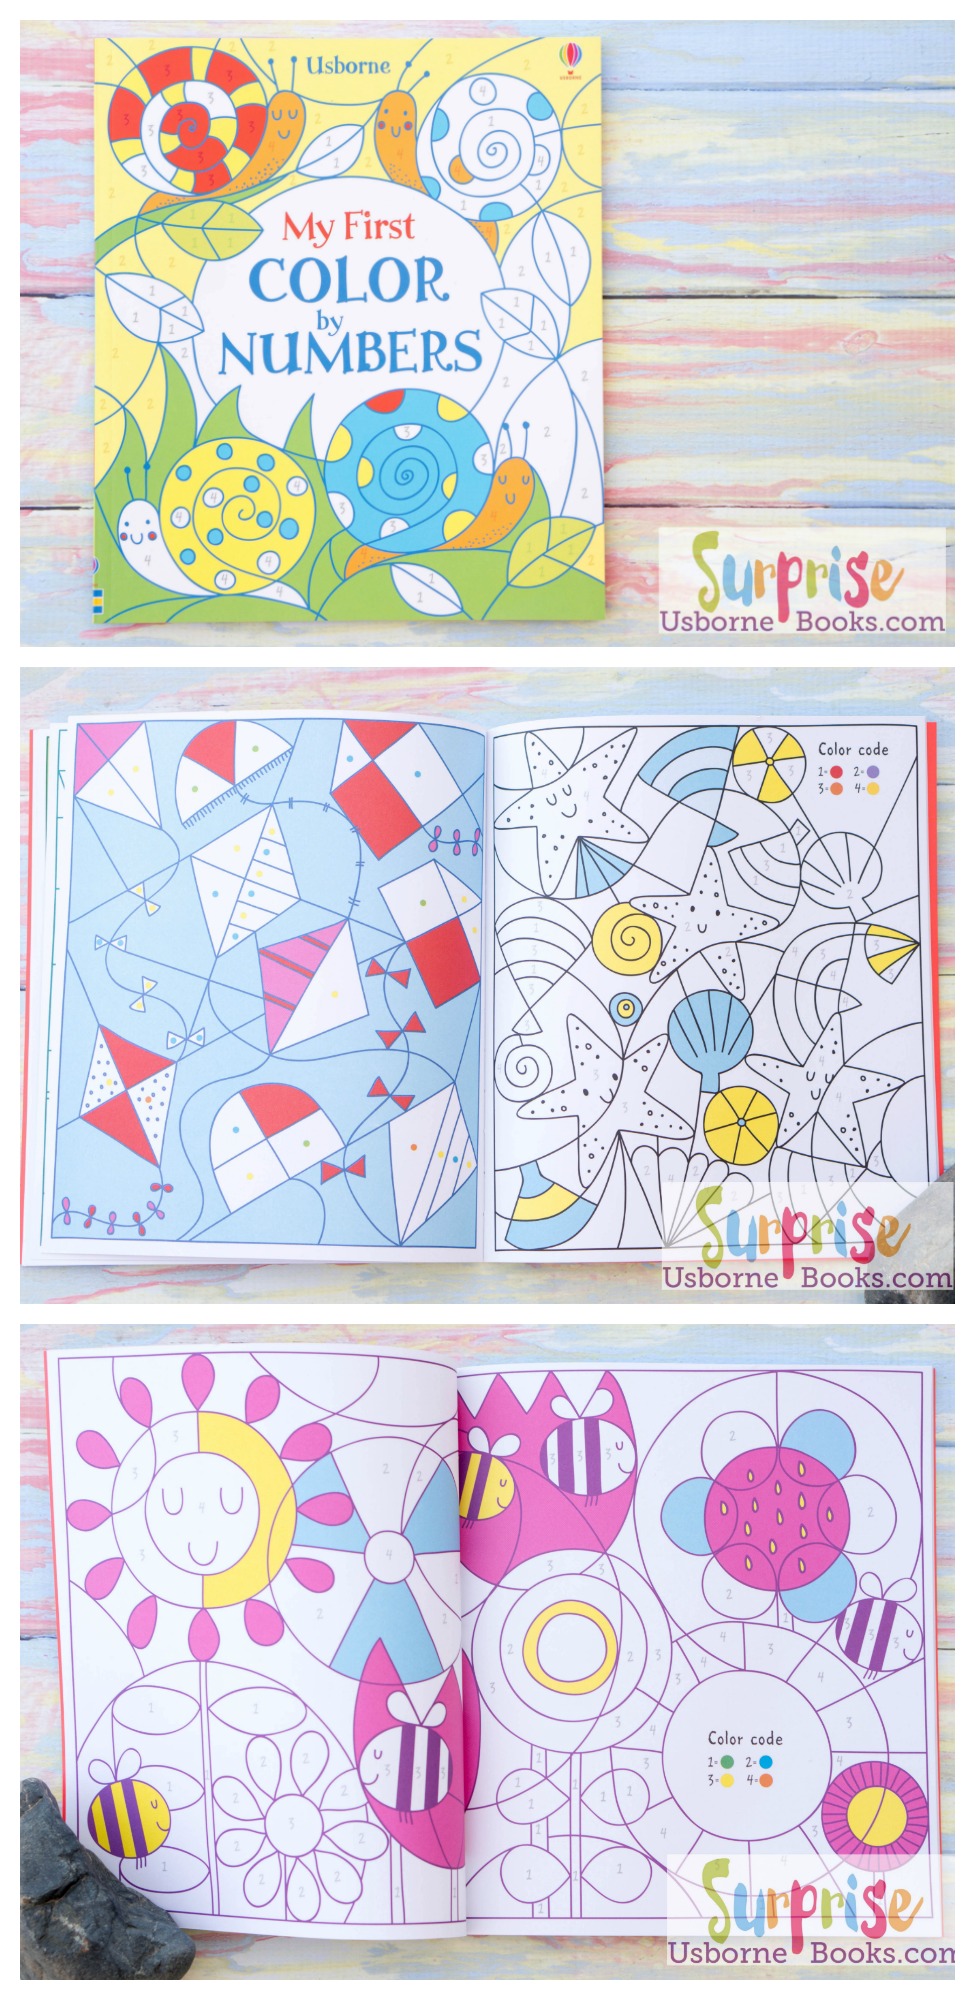 My First Color by Numbers - Surprise Usborne Books